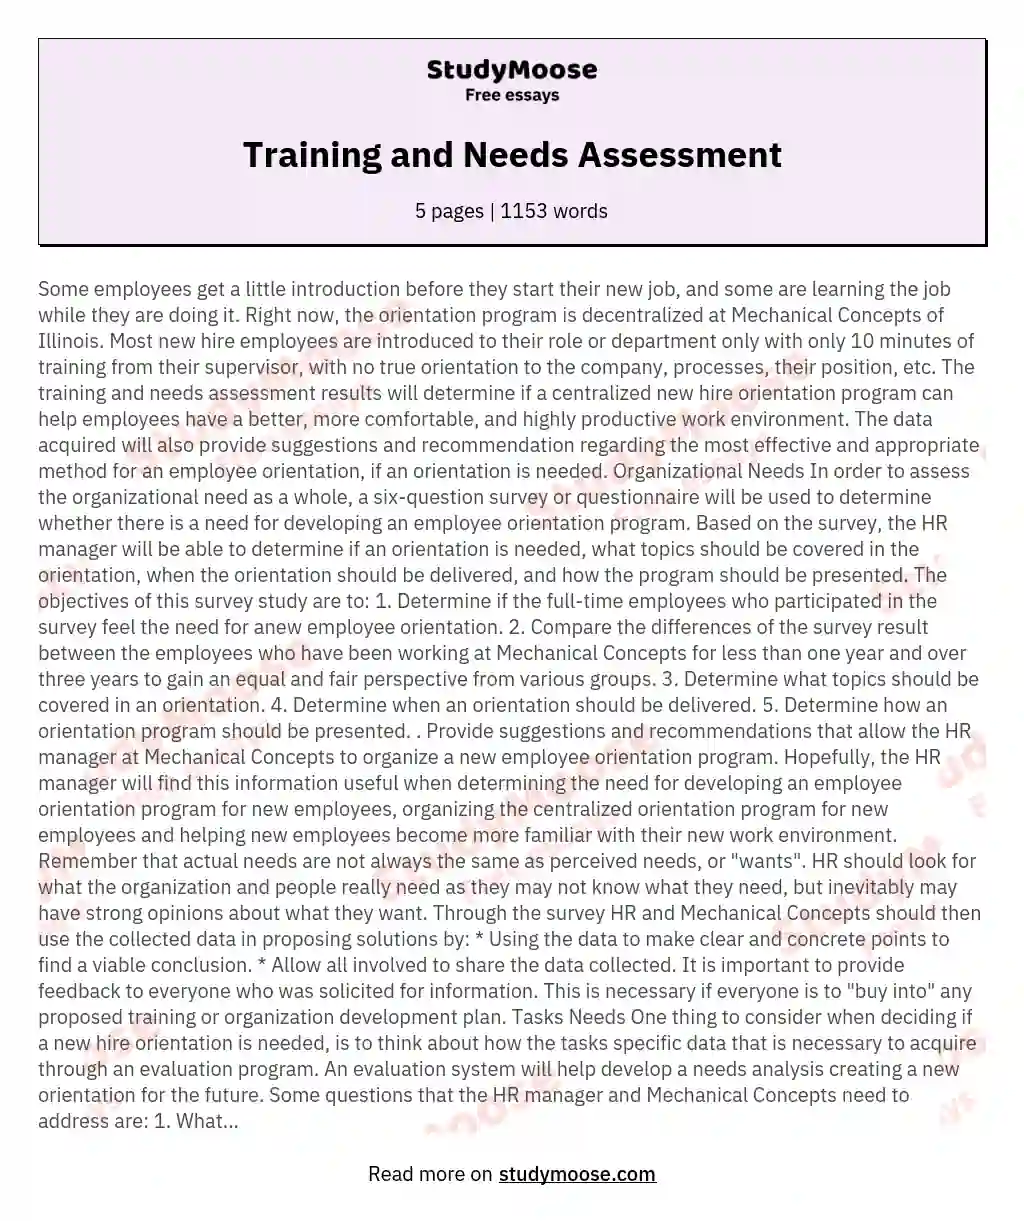 Training and Needs Assessment essay